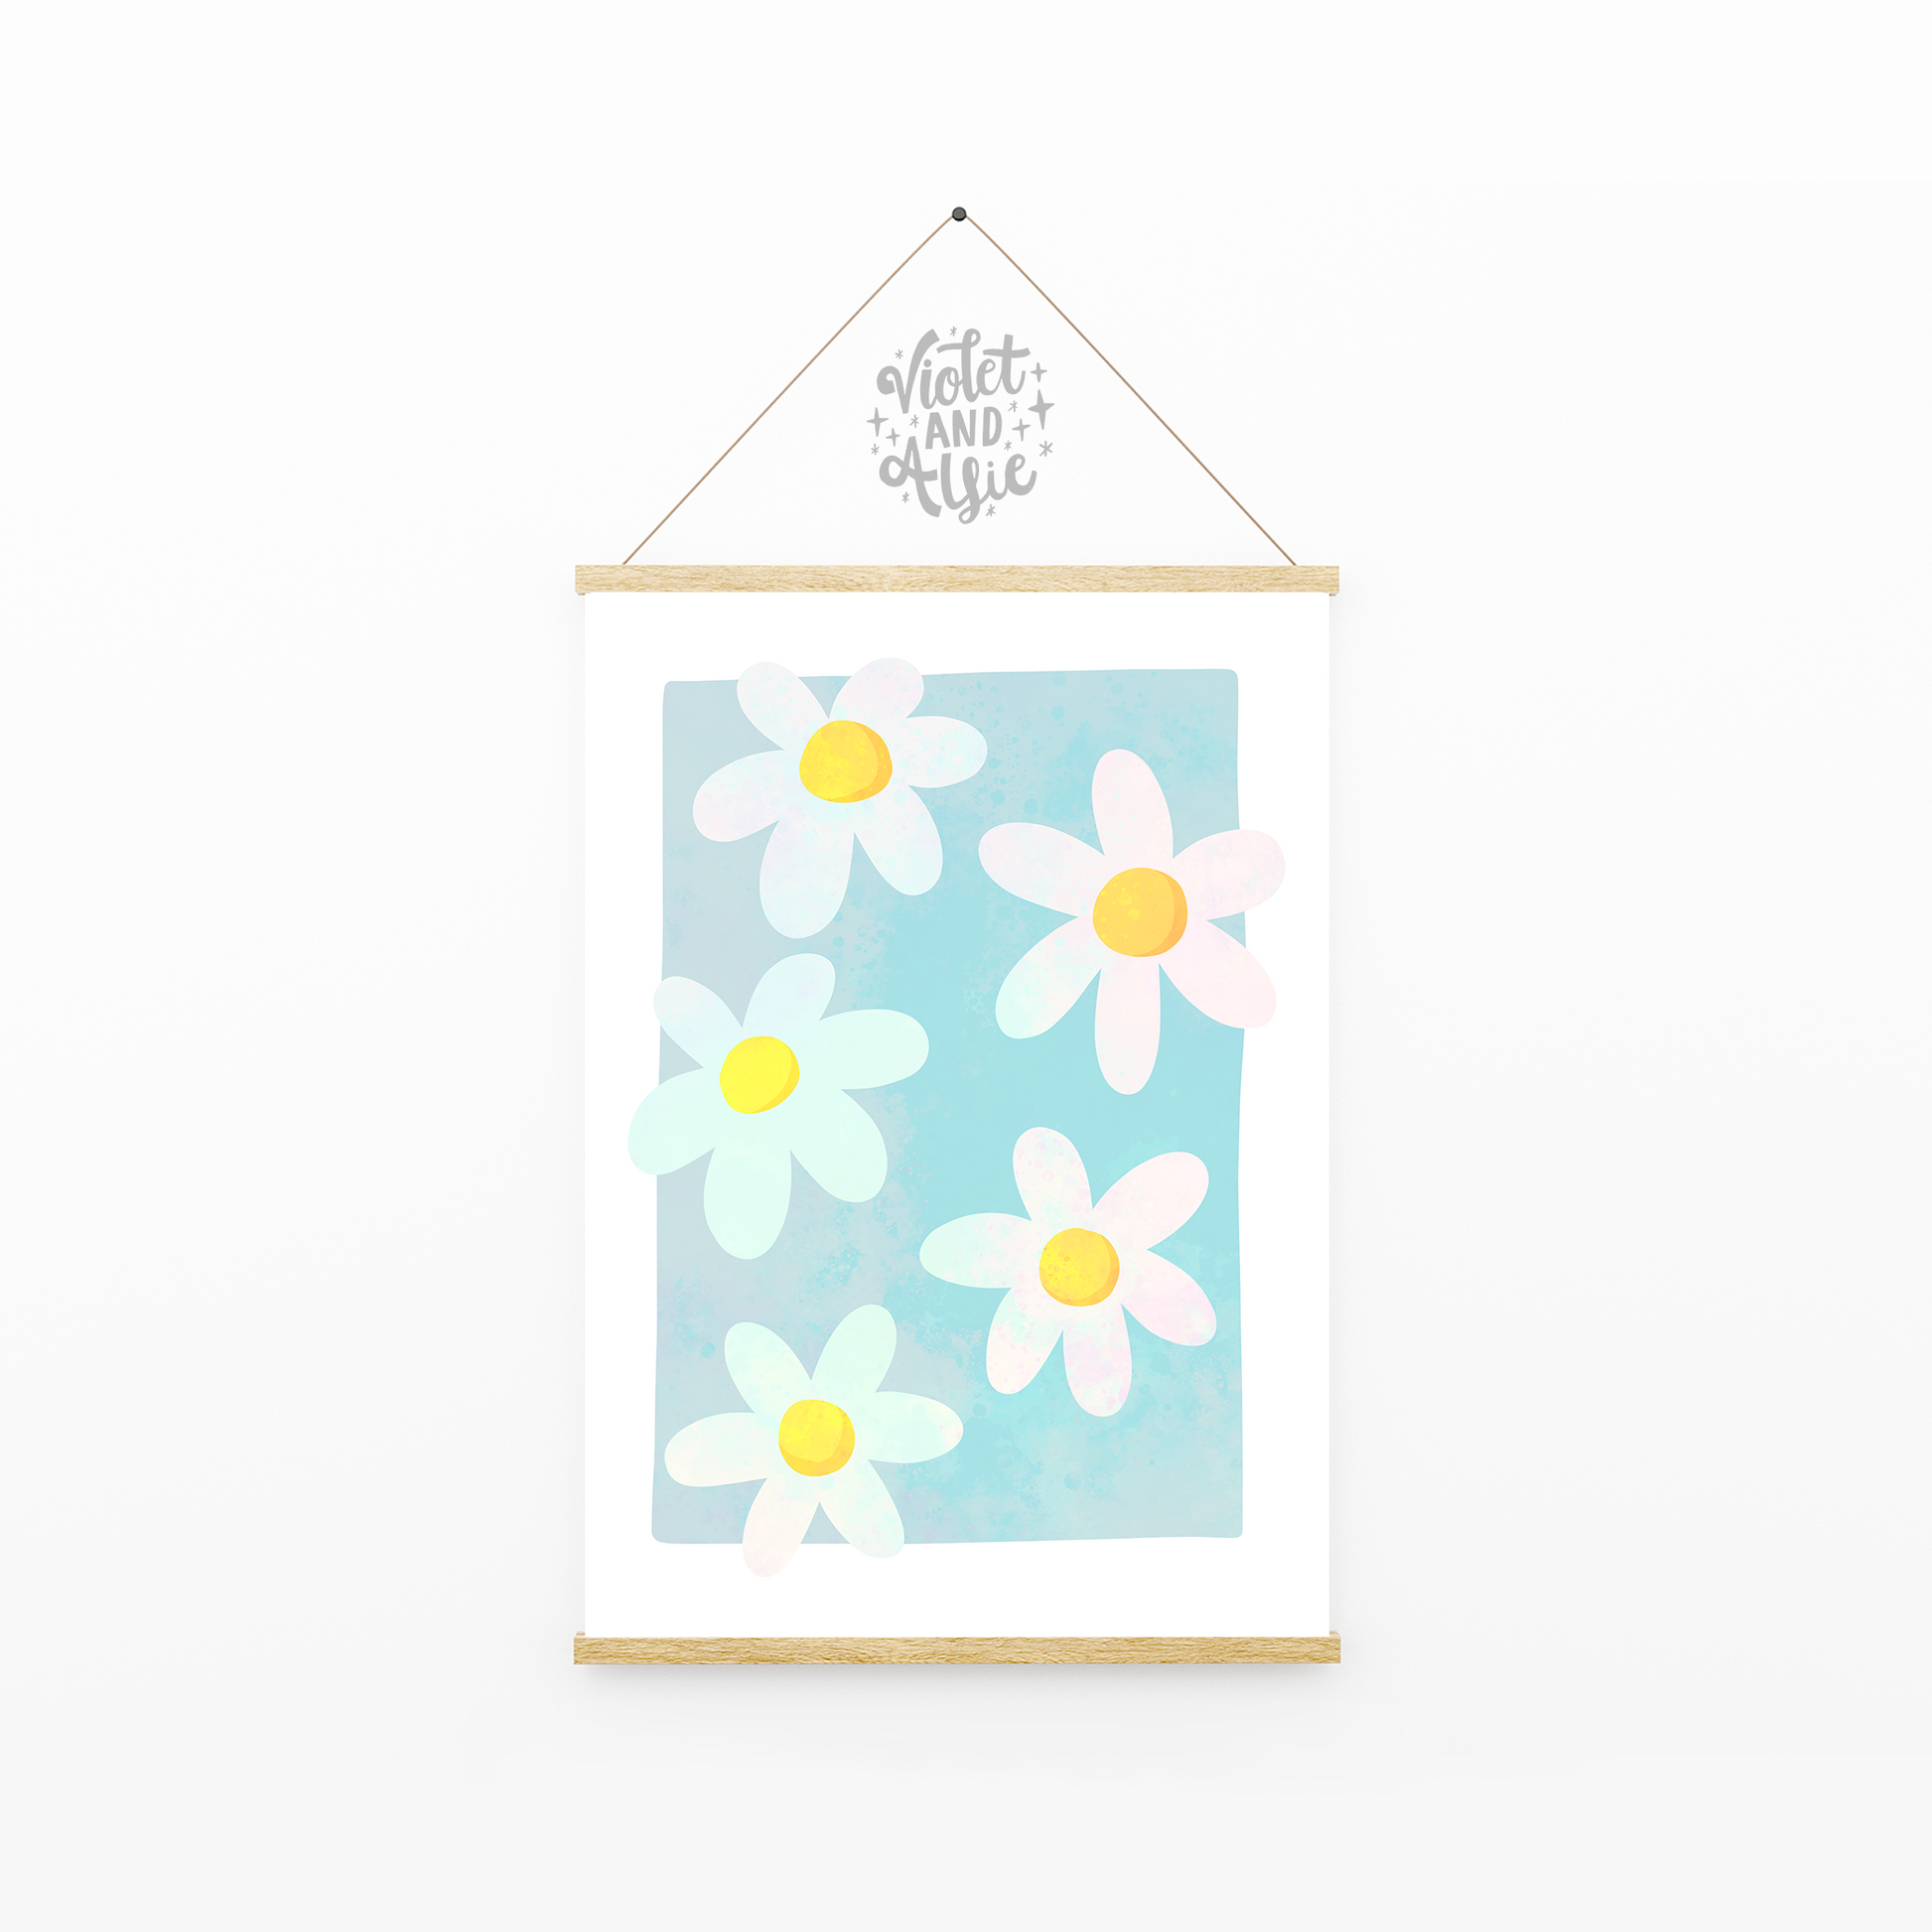 This pretty blue daisy print is fab to brighten up any space. Retro Daisy Print, Simple Flower Wall Art, Pastel Blue Home Decor, botanical daisy print, flower illustration art, Bold flowers wall art, daisies poster, floral wall print, fresh summer decor, daisy flower art prints, flower market prints, colourful decor 